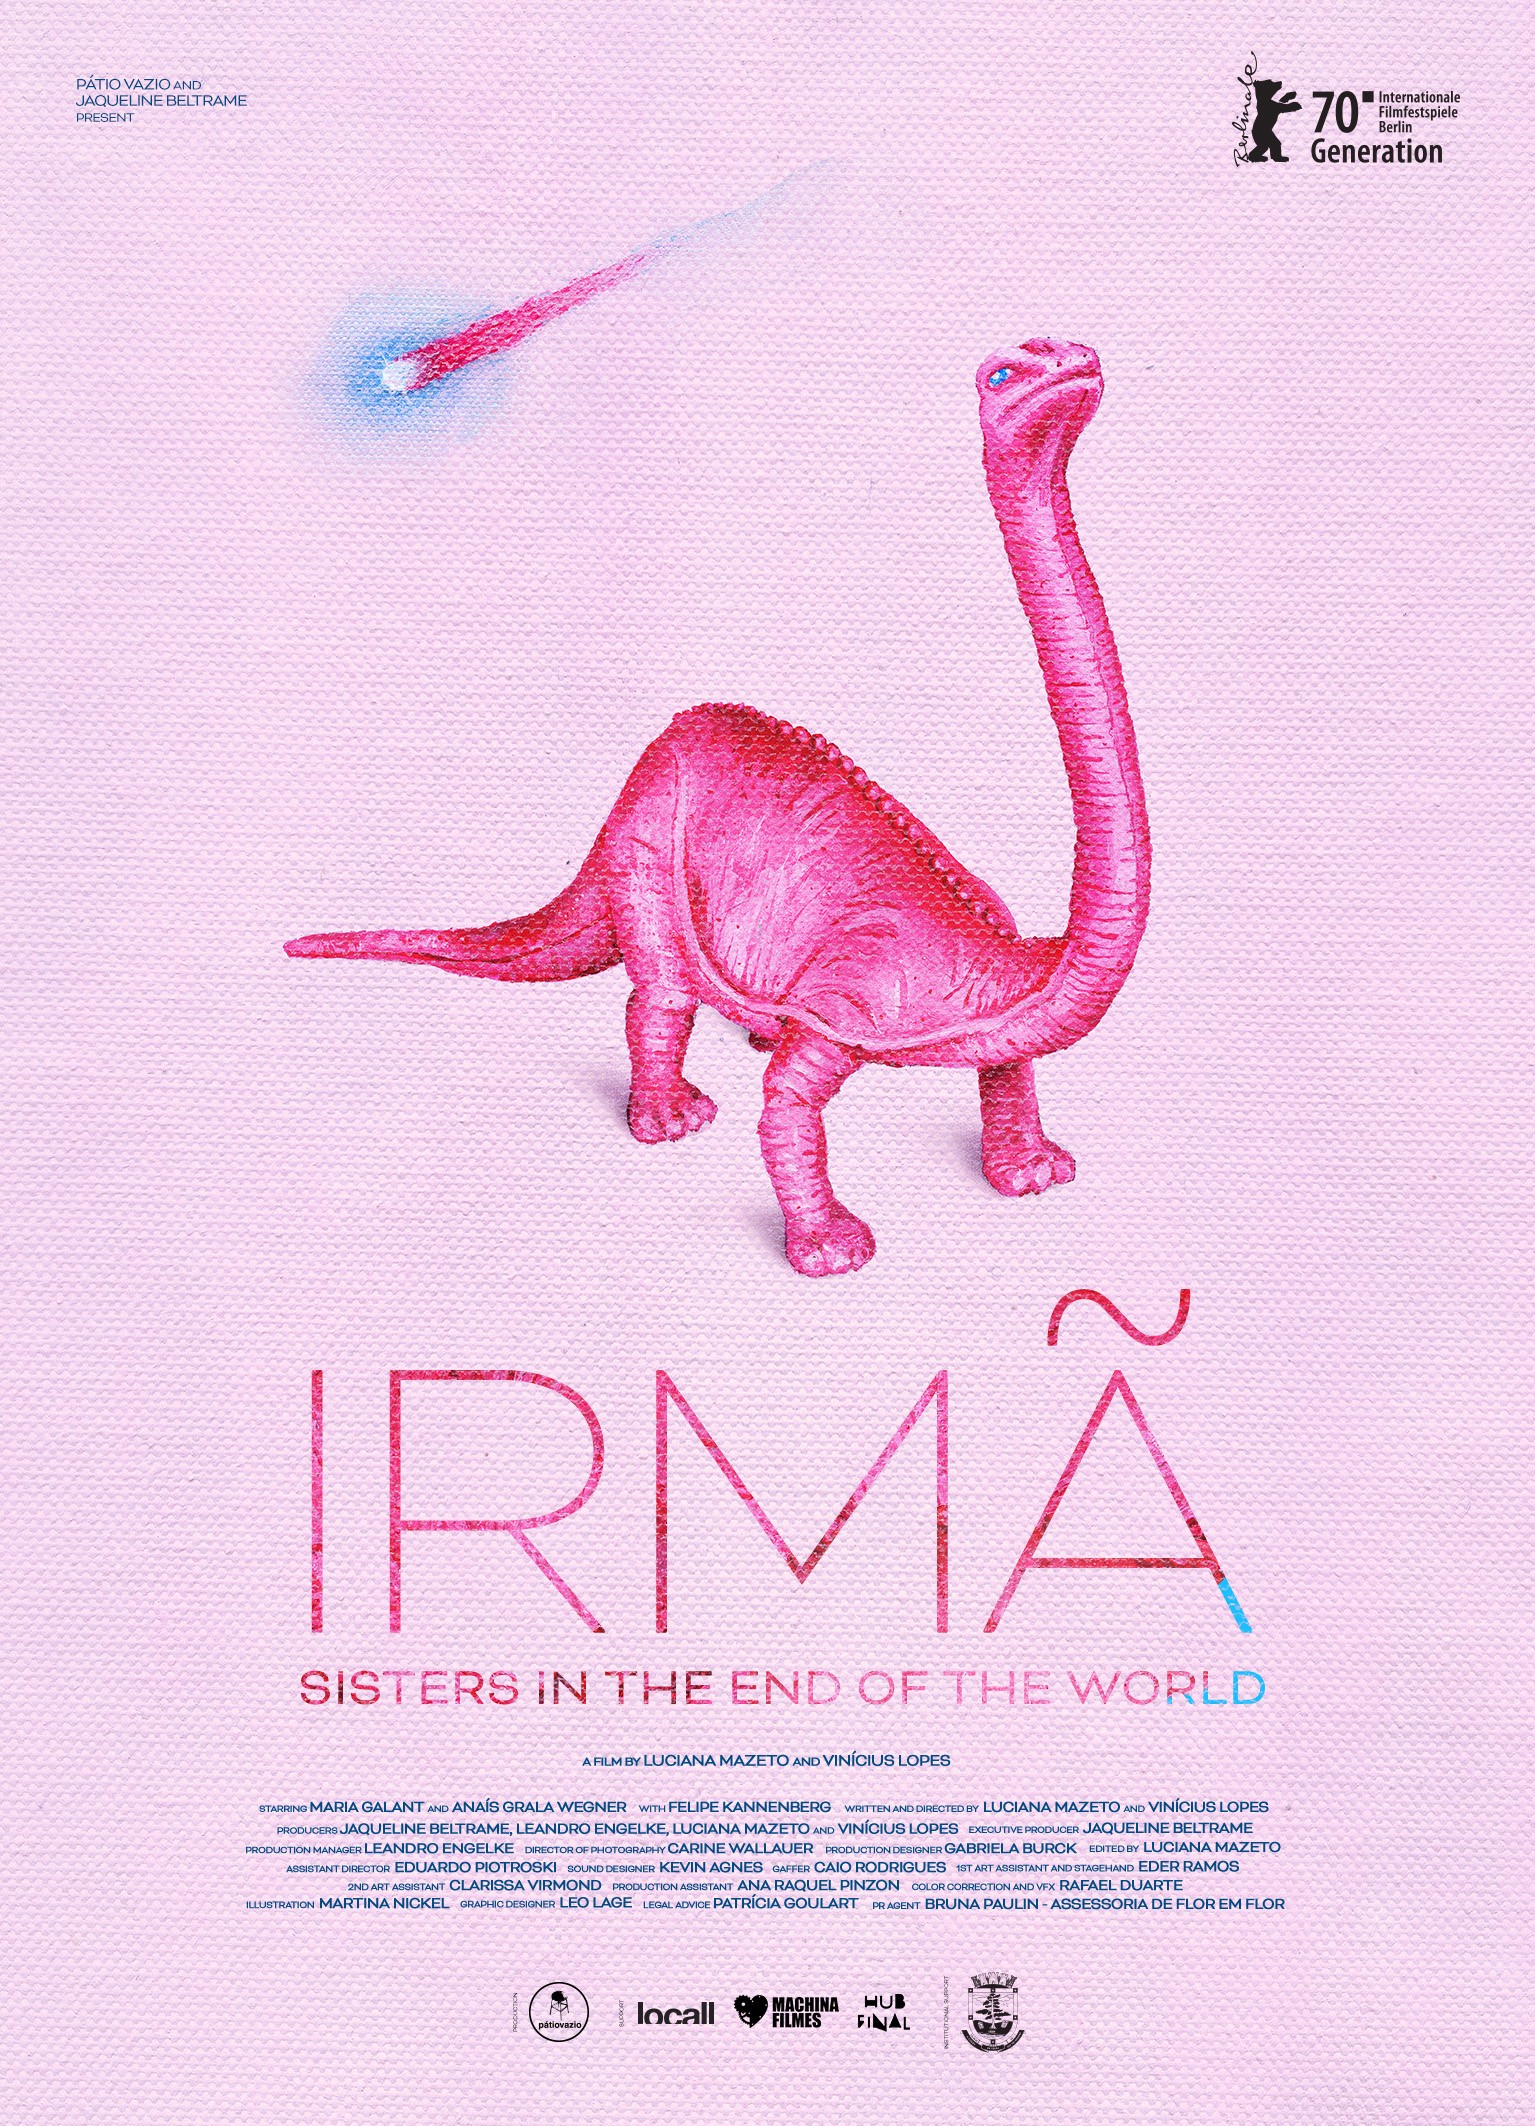 Irmã - Sisters in the End of the World